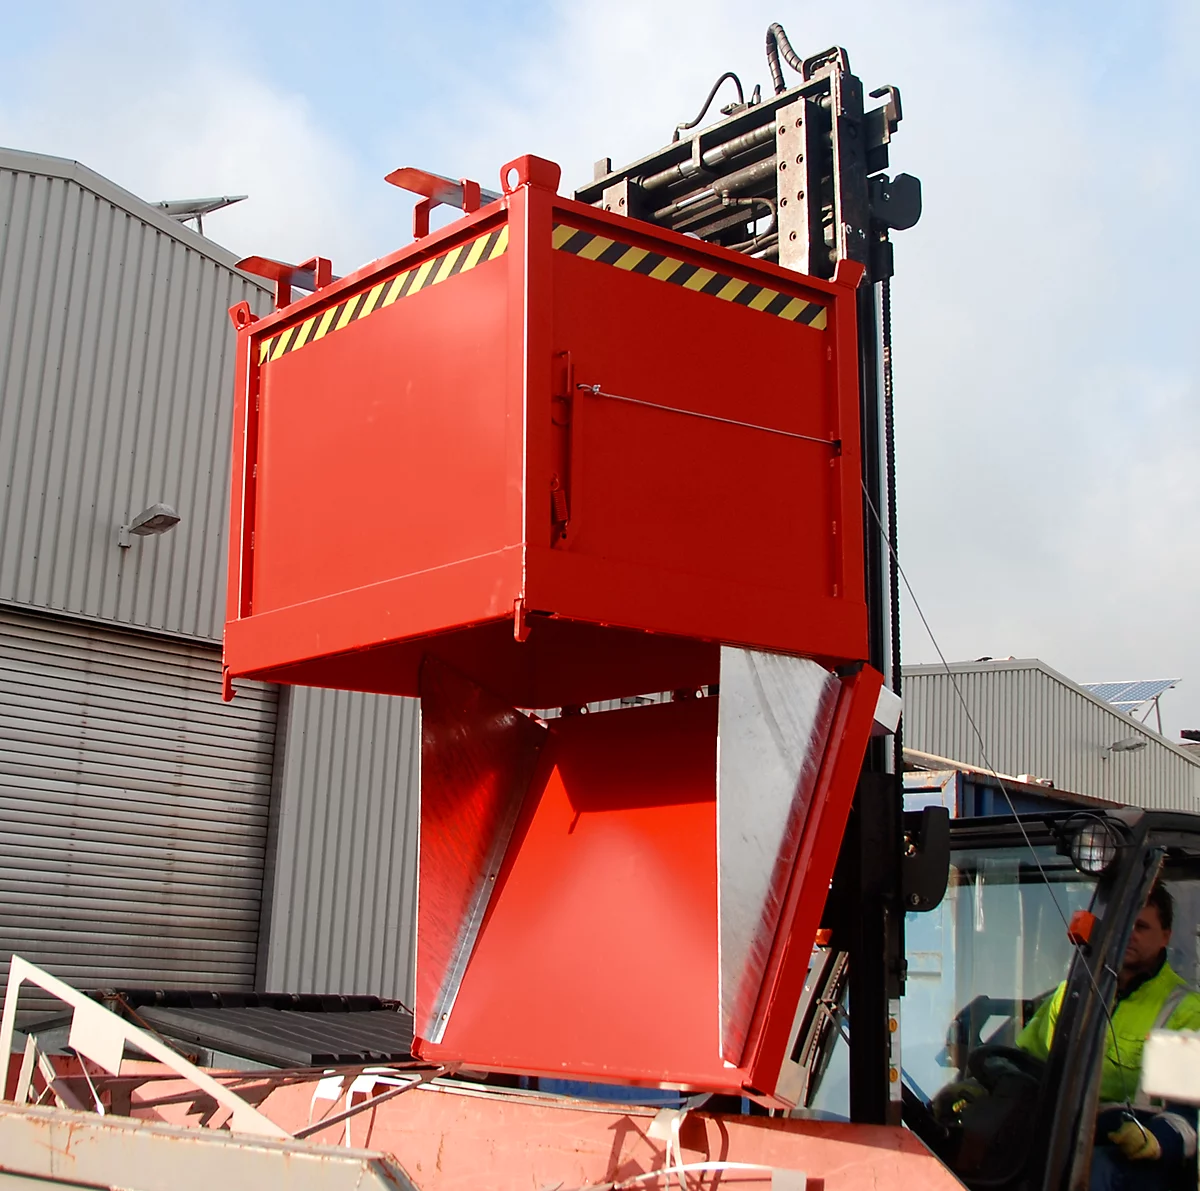 Bodemklepcontainer FB 750, rood